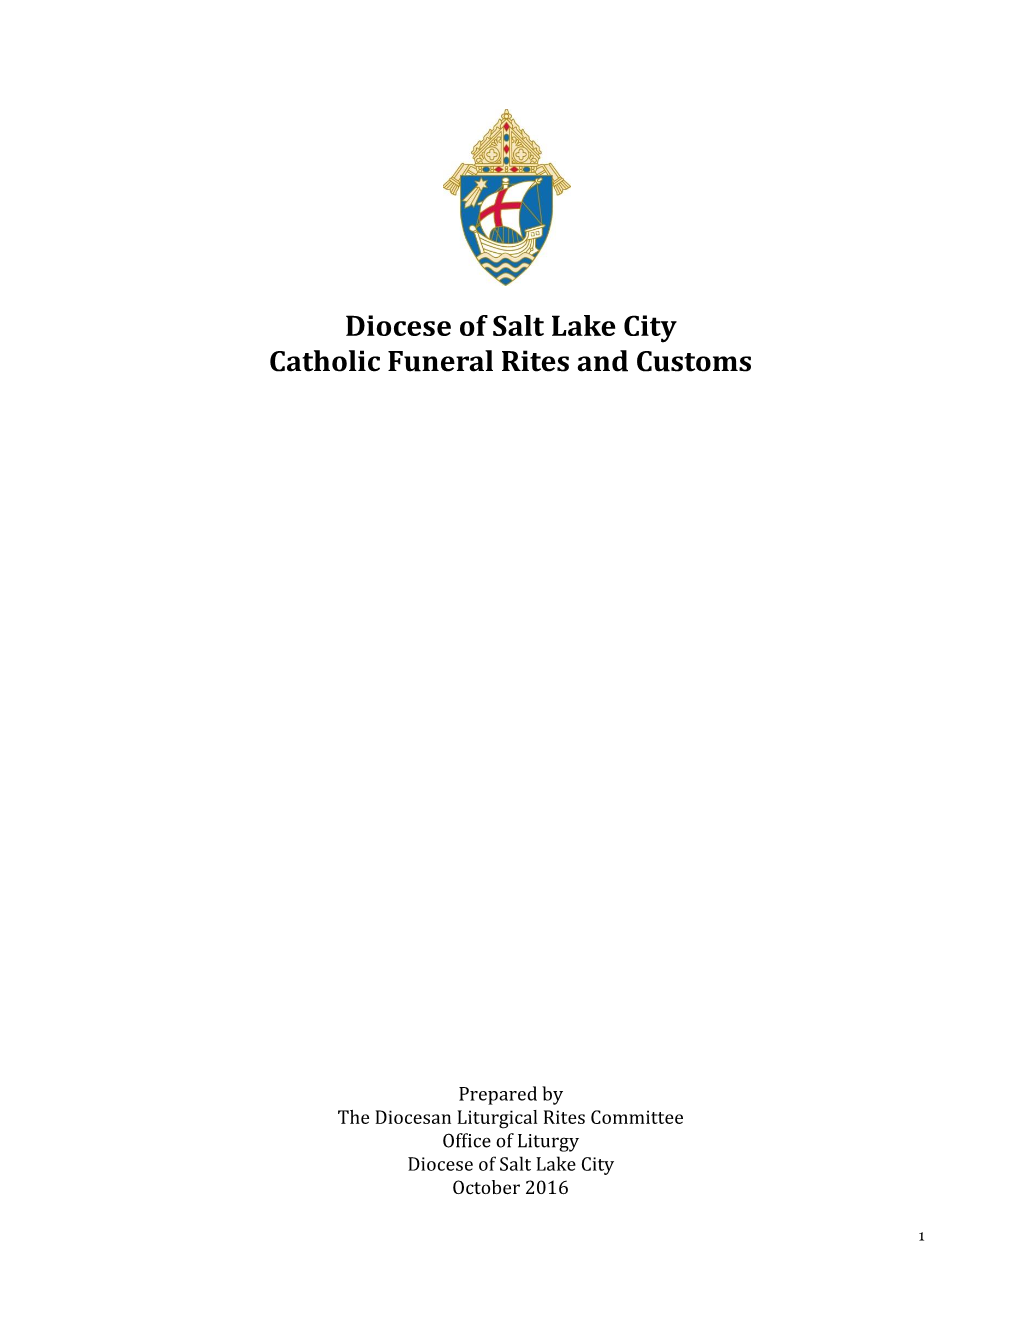 Diocese of Salt Lake City Catholic Funeral Rites and Customs